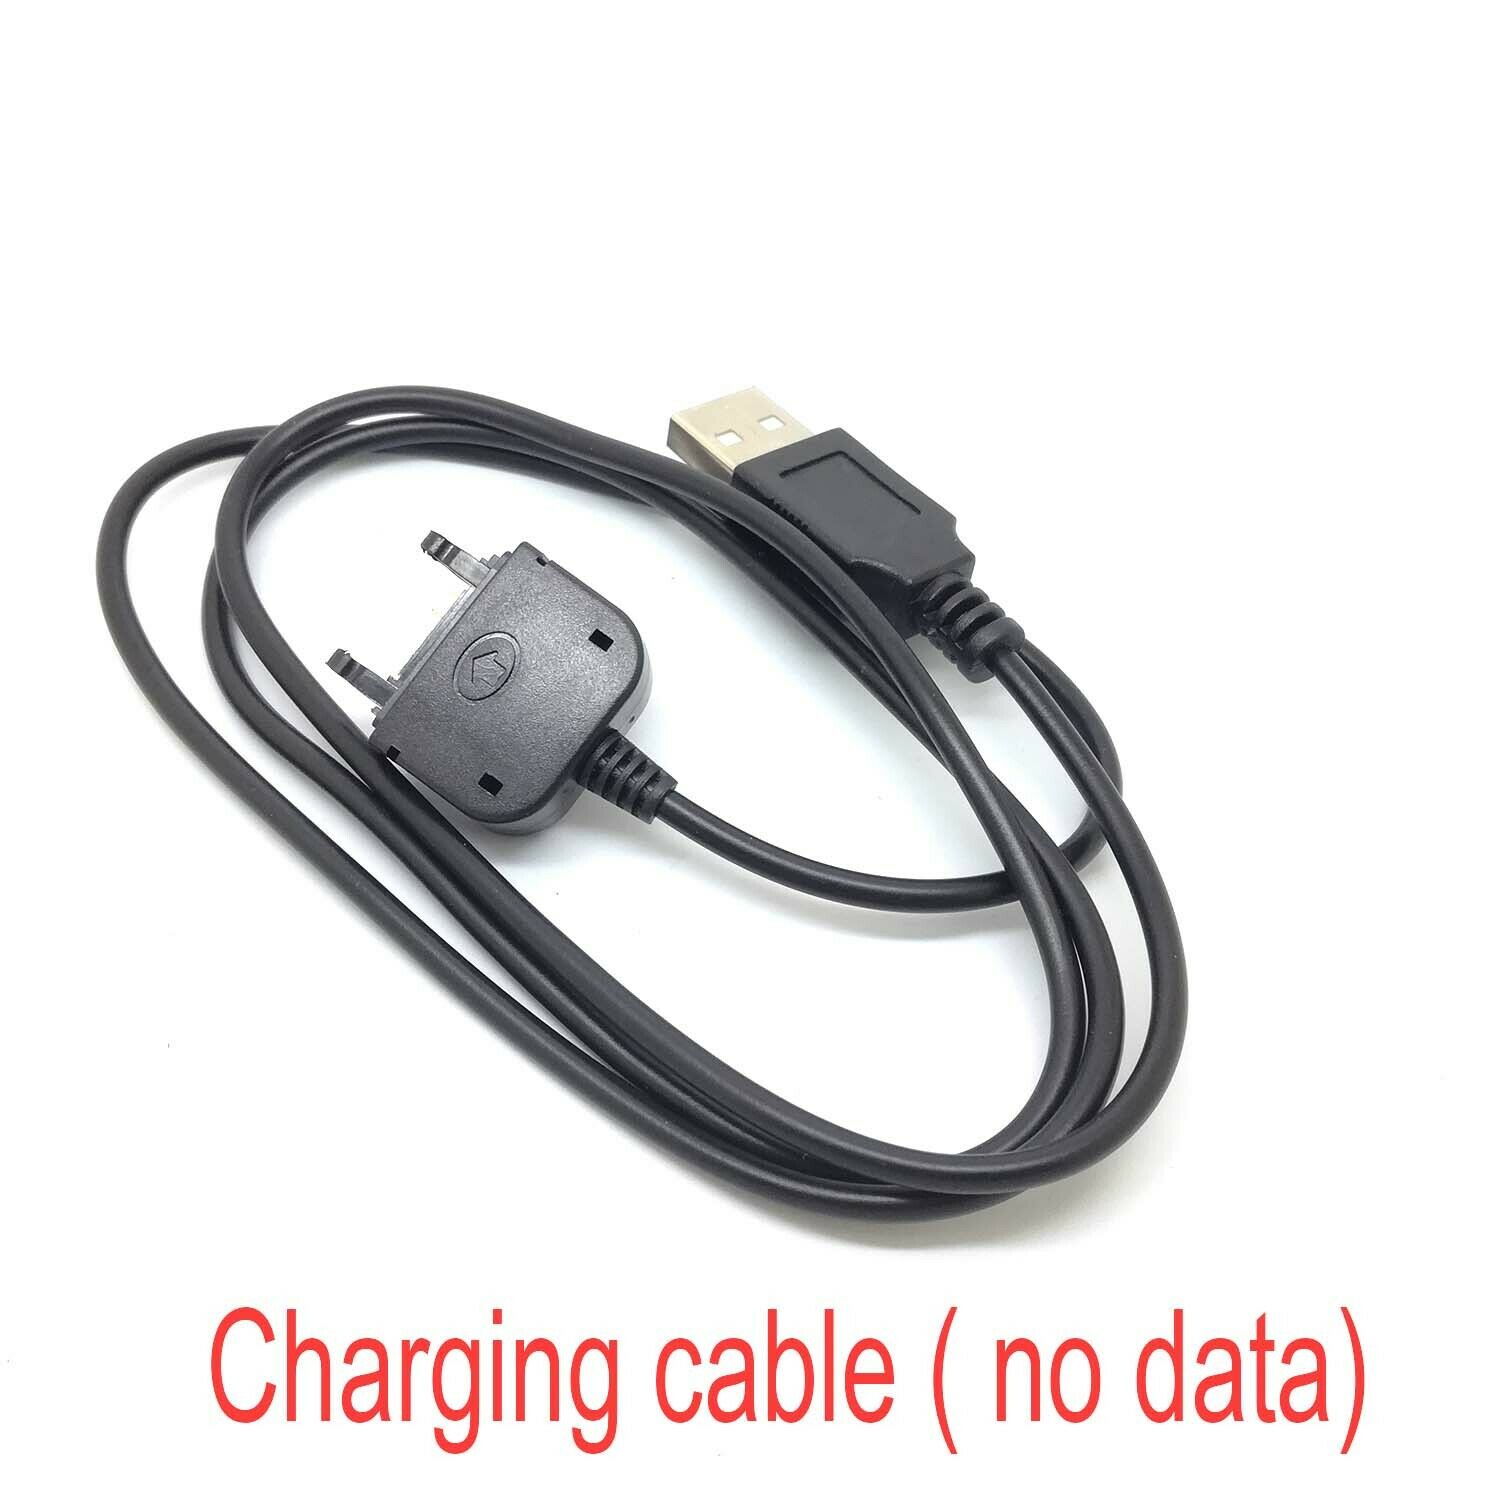 USB Charger CABLE for Sony Ericsson W810 W810i W830 W830i W850 W850i W880 Z310 Z310i Z320 Z320i Z520 Z520i Z525